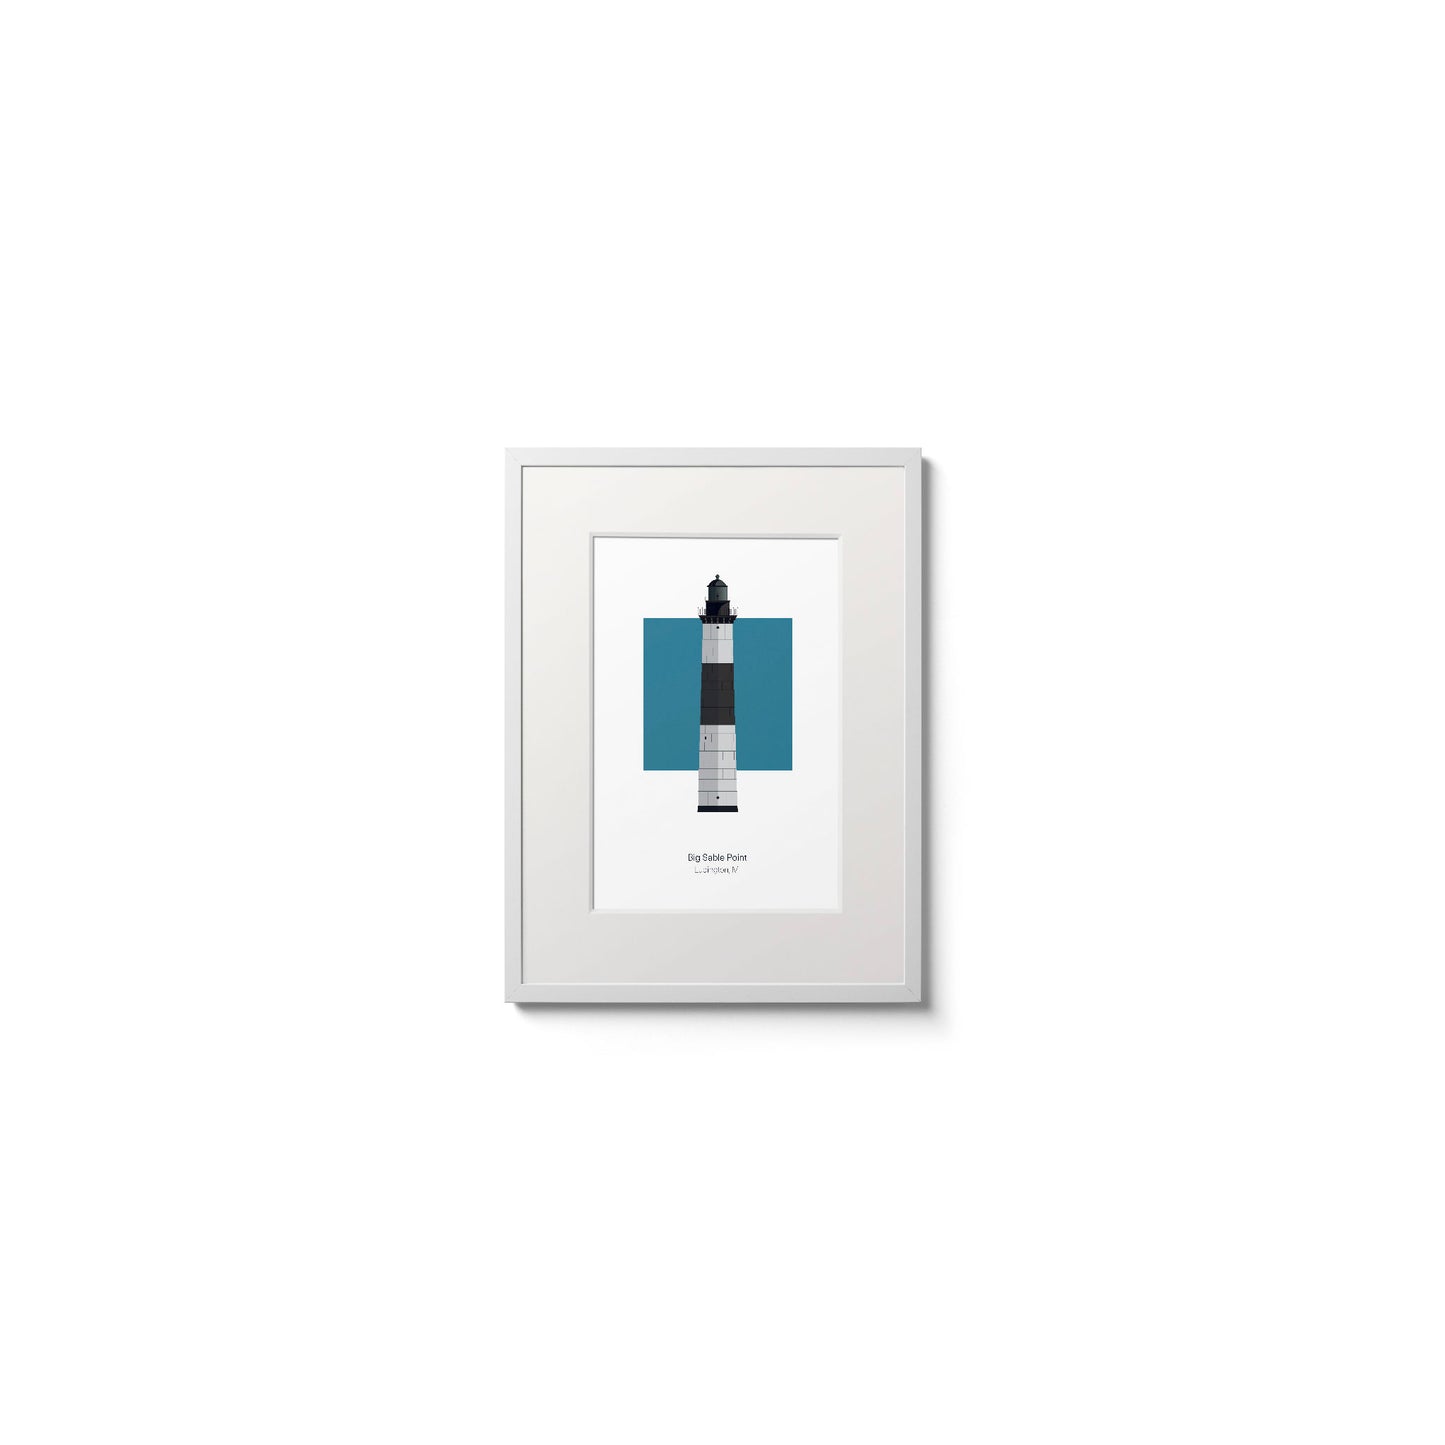 Illustration of the Big Sable Point lighthouse, Rhode Island, USA. On a white background with aqua blue square as a backdrop., in a white frame  and measuring 6"x8" (15x20cm).